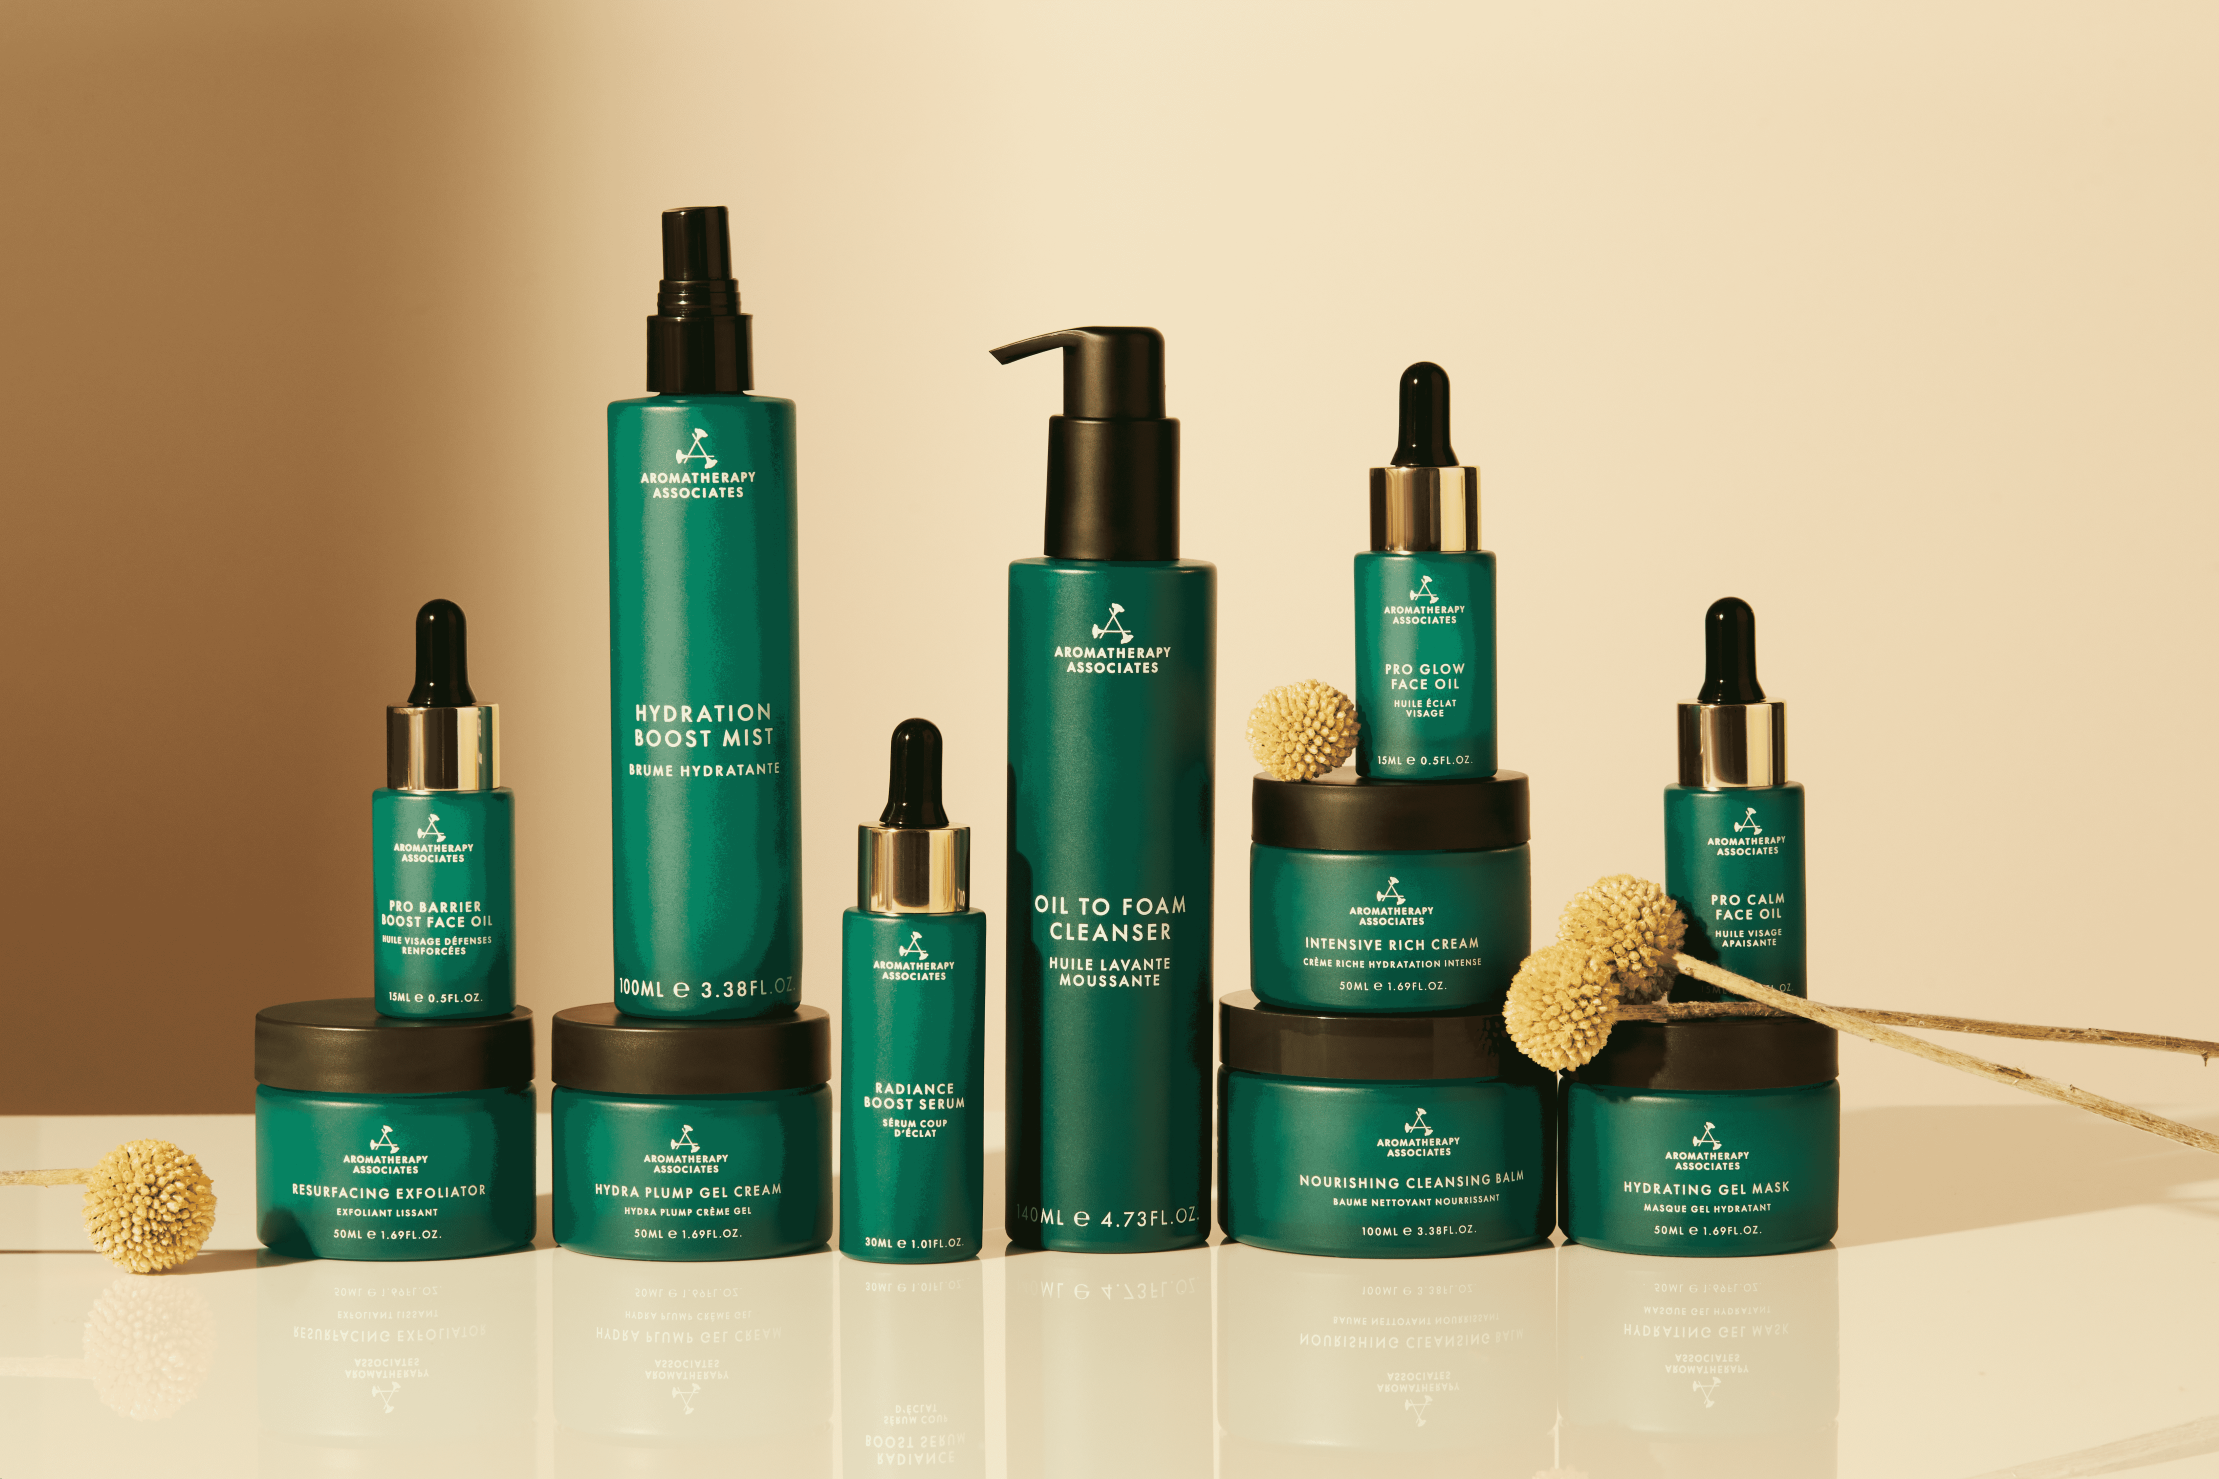 Introducing our NEW Next Generation Skincare